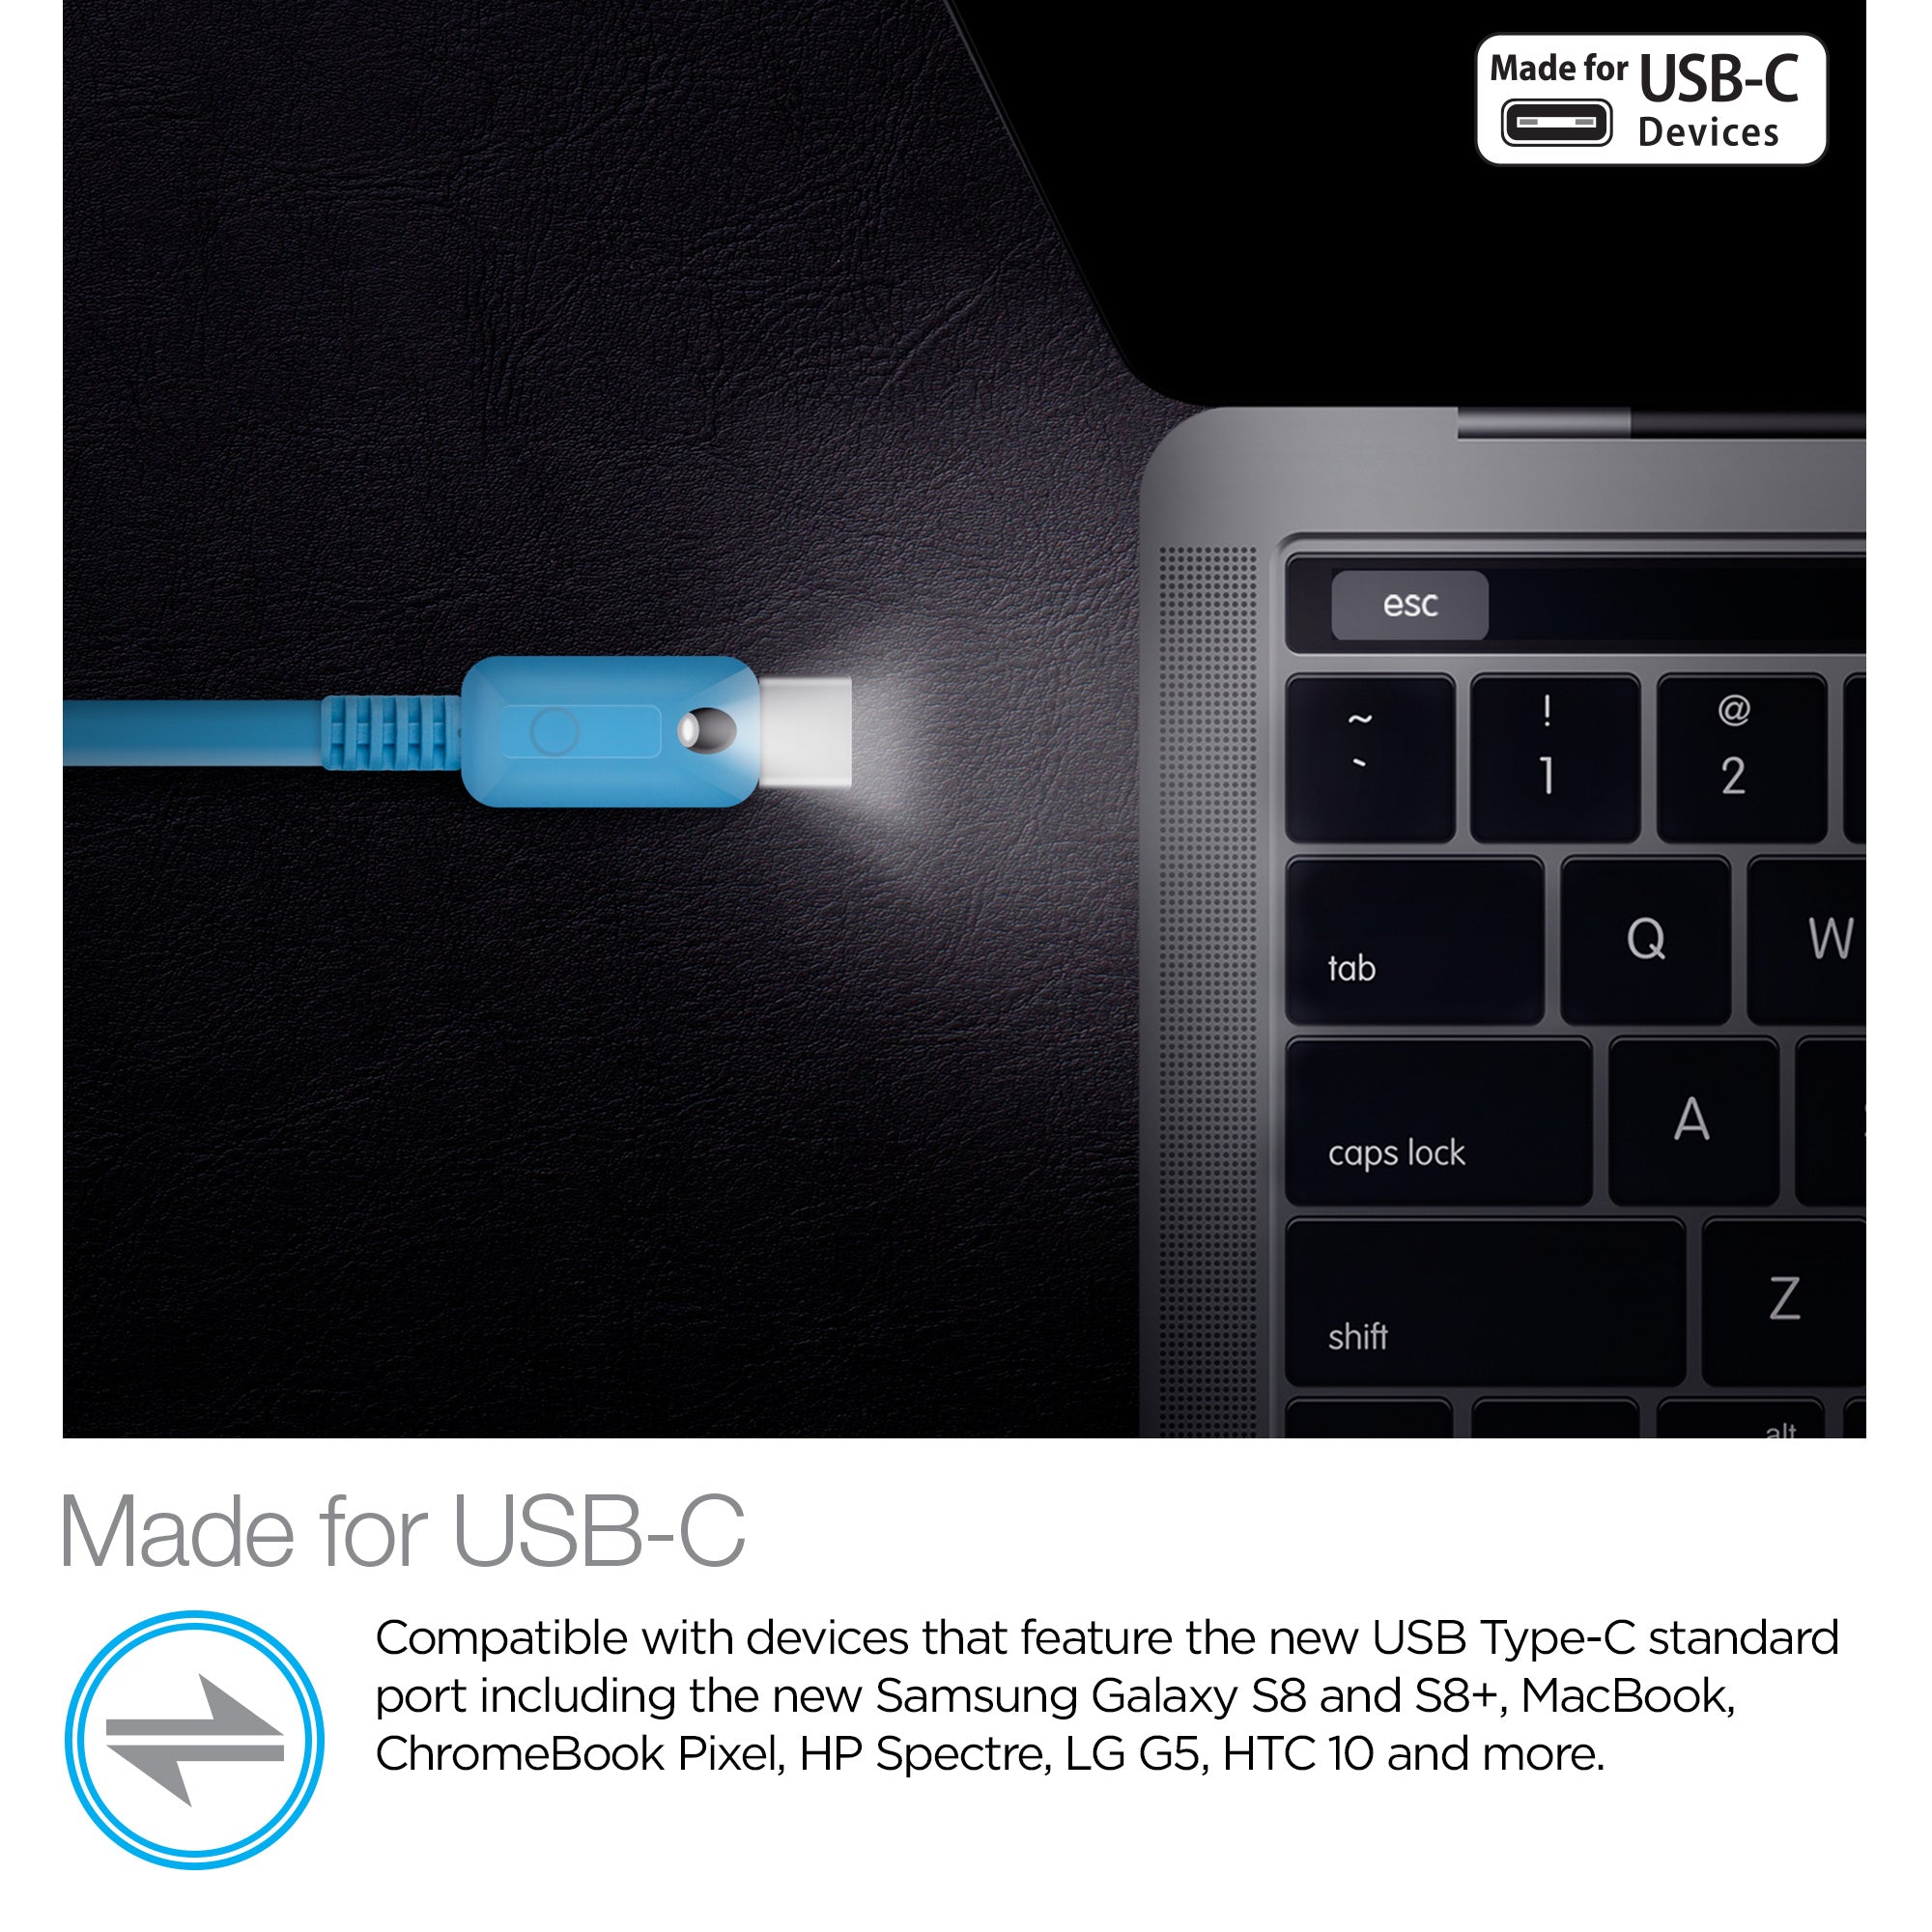 Lighted USB to USB-C Flat Cable | 6ft | Blue